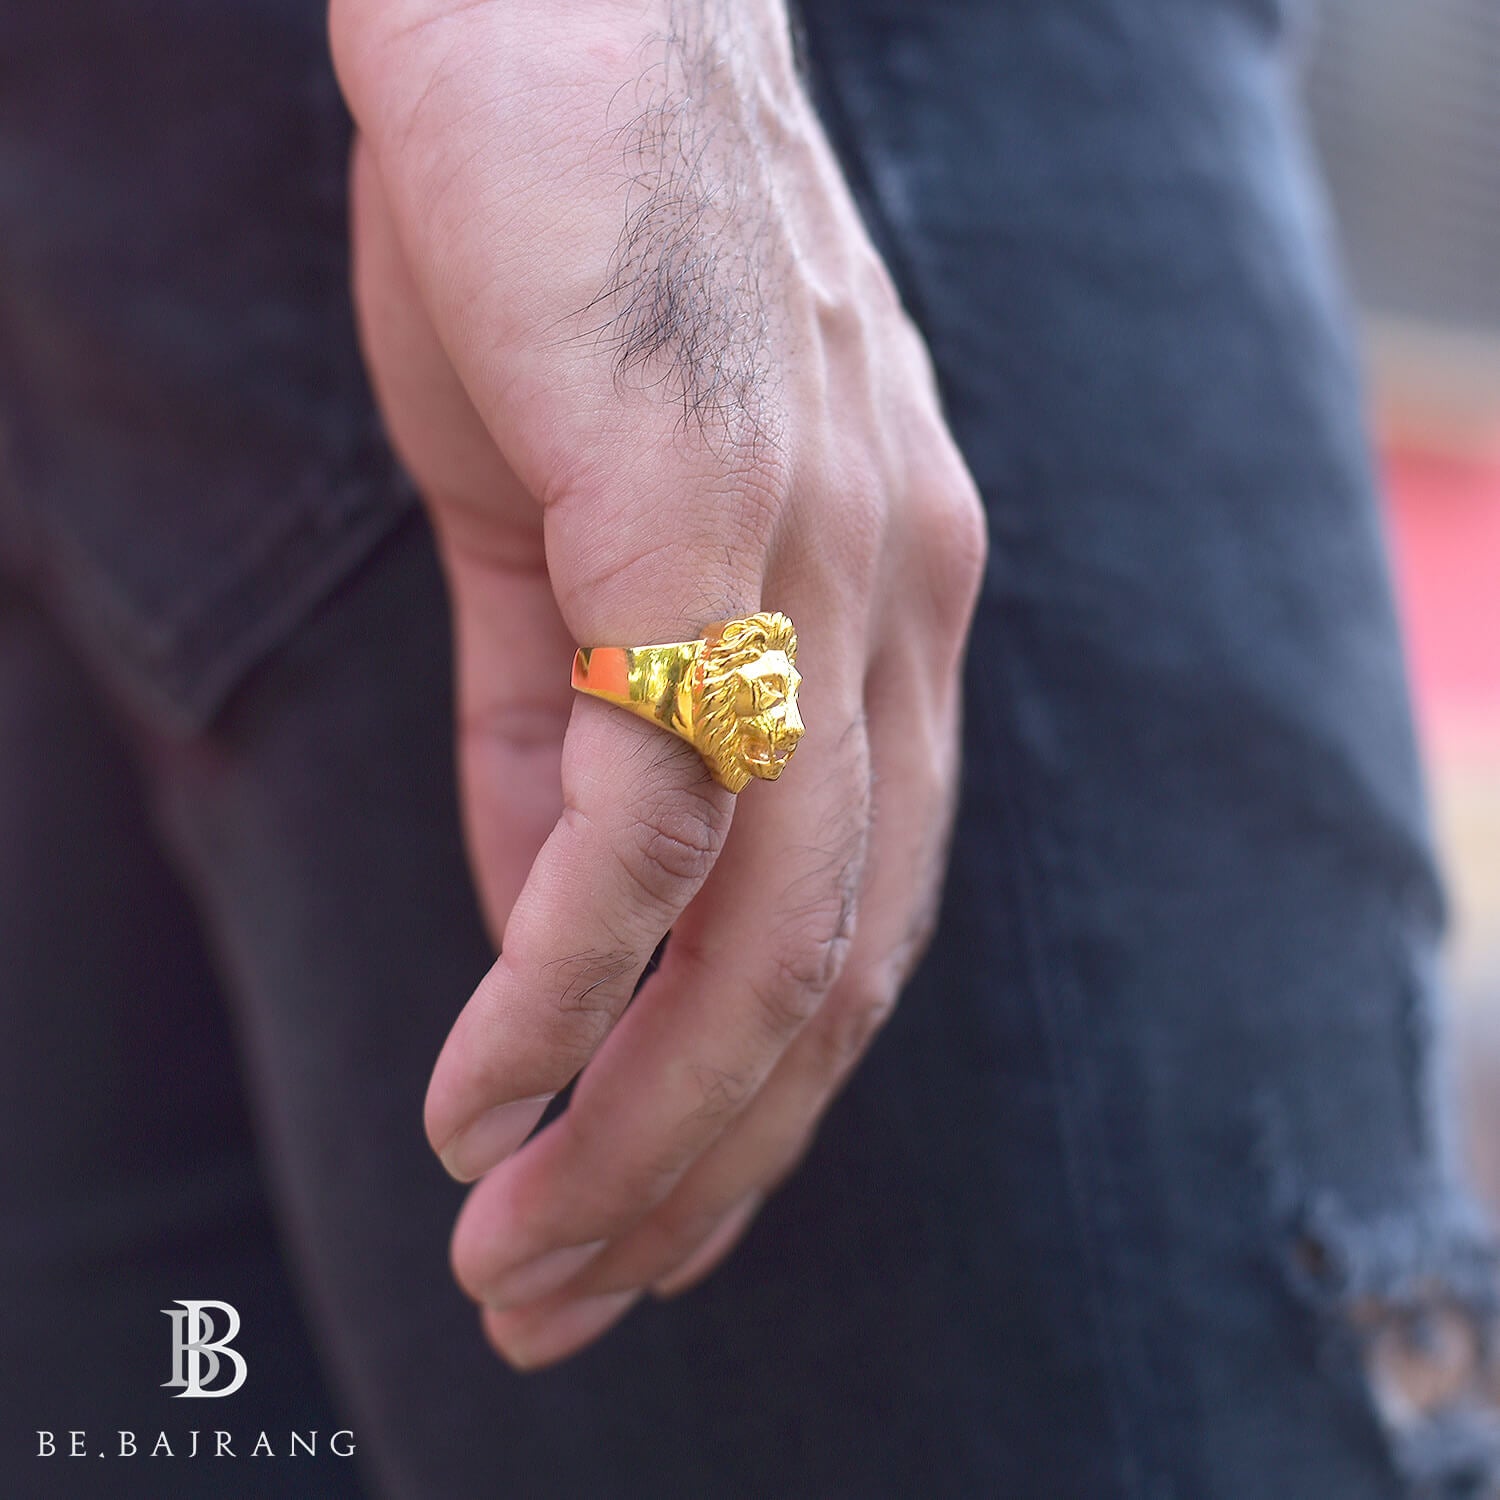 Romantic Lion Head Gold Filled Natural Viet Gold Self Defence Ring For Men  Stylish And Elegant Punk Style Jewelry By DSHIP From Legou668, $3.01 |  DHgate.Com